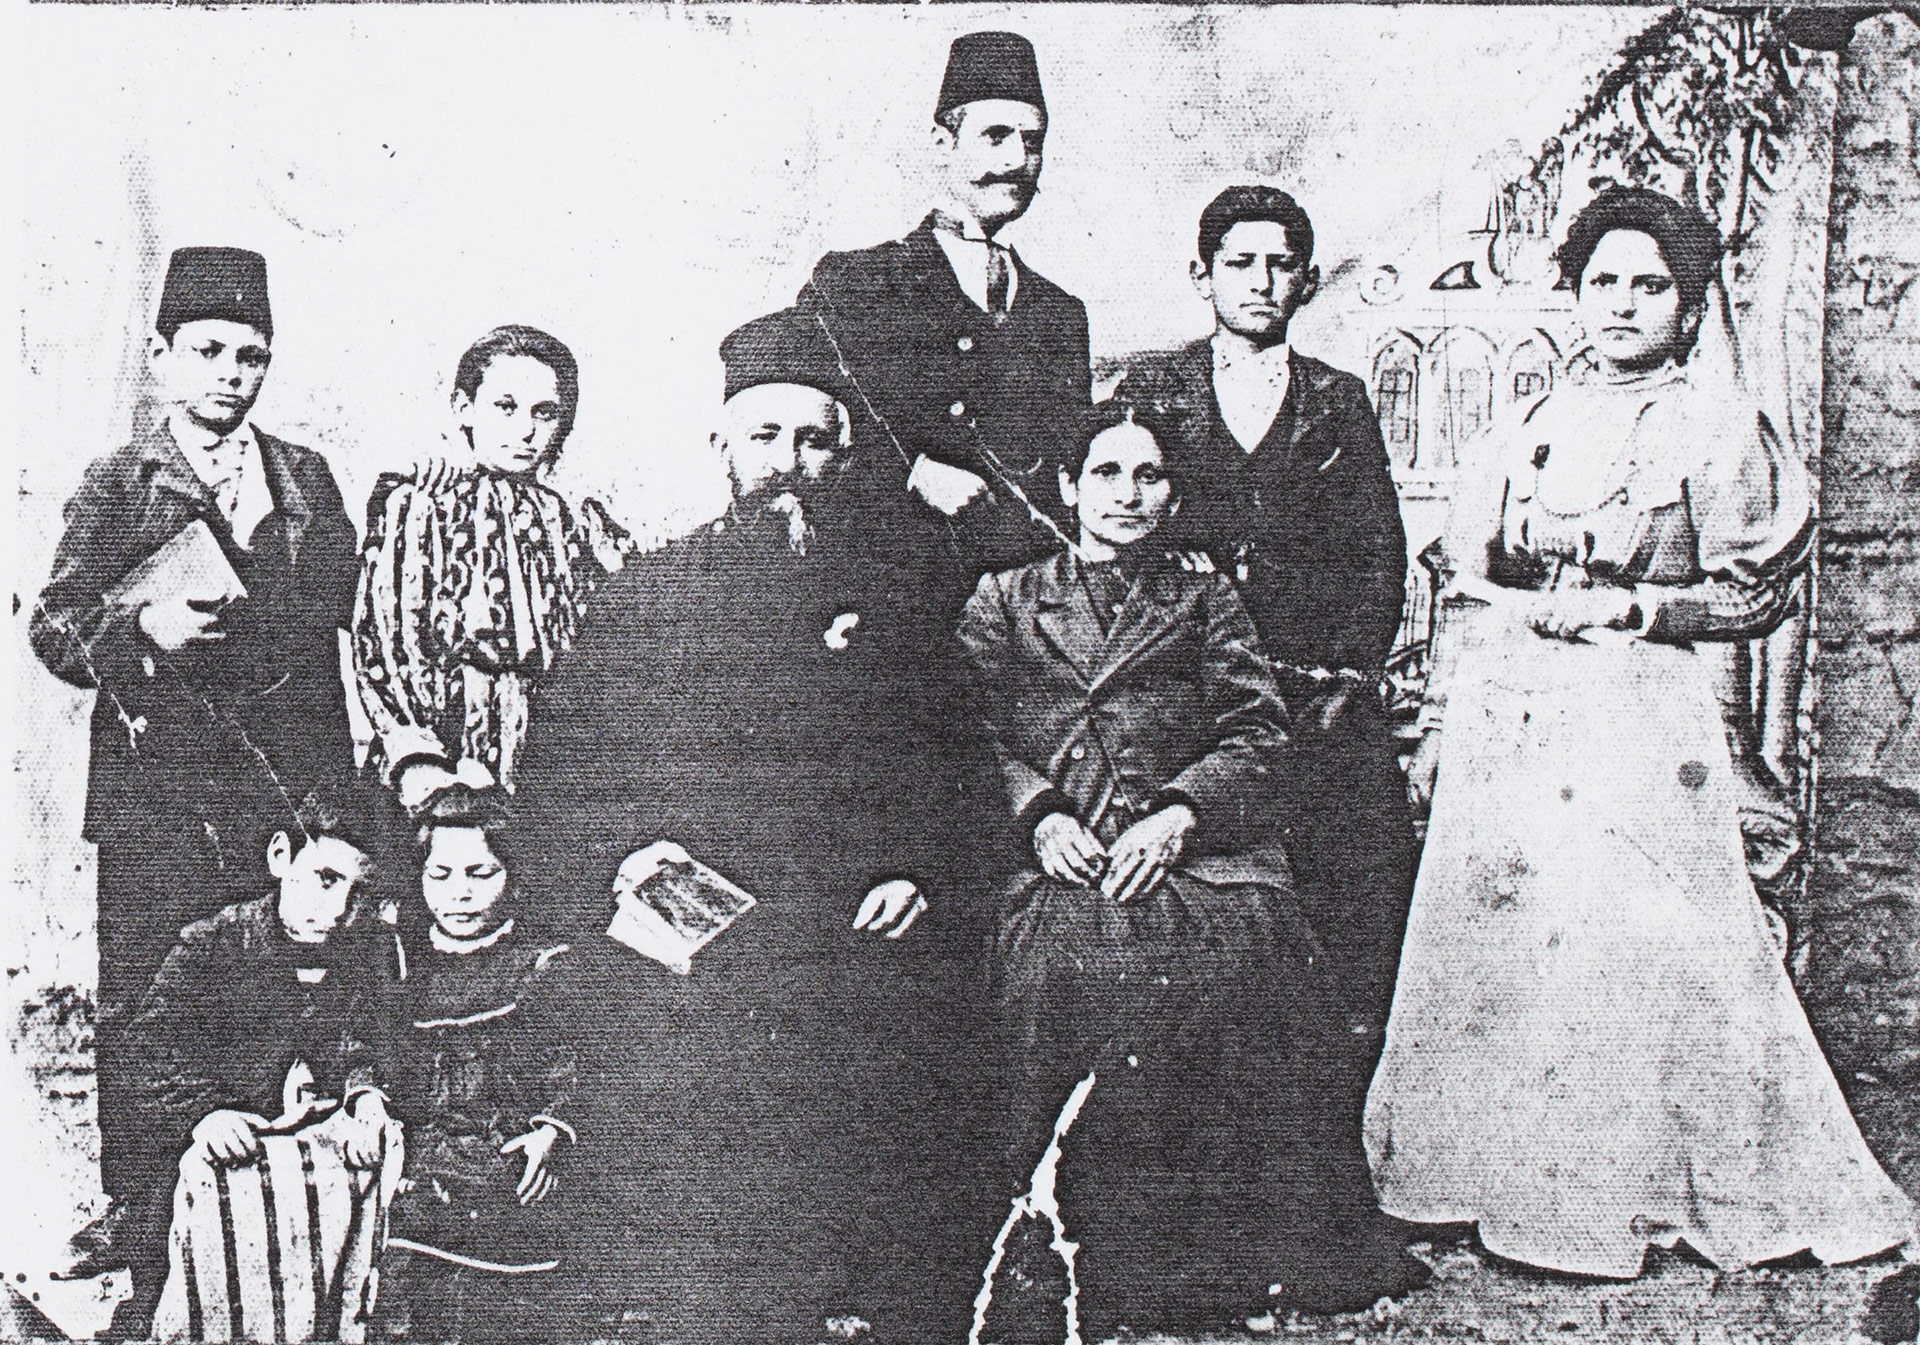 A black and white portrait of an Armenian family.